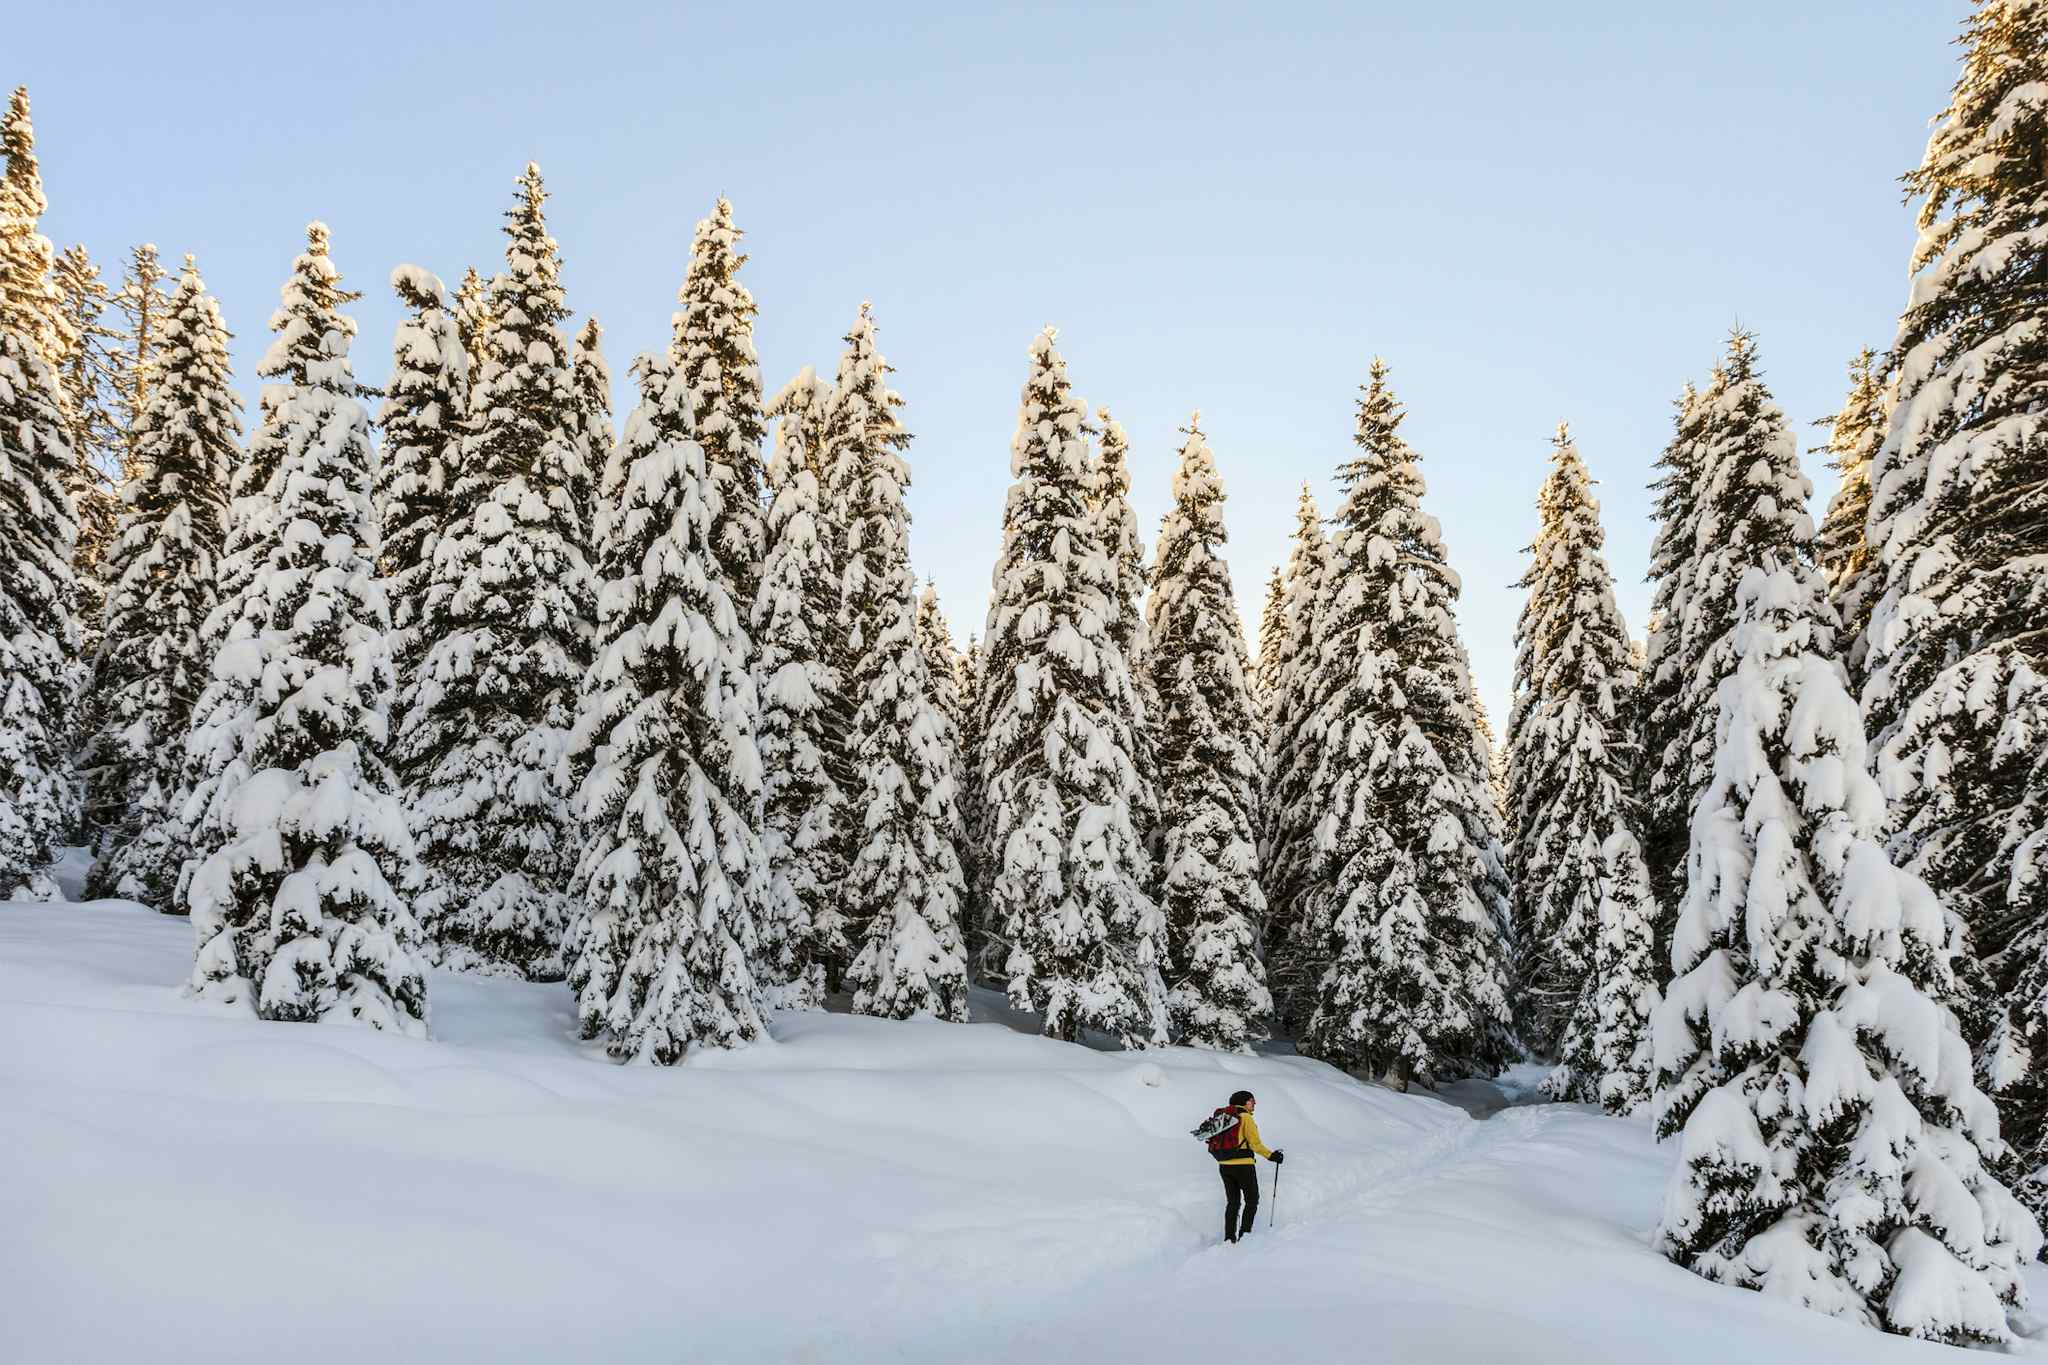 Snowshoer among the trees in the Dolomites, Italy.